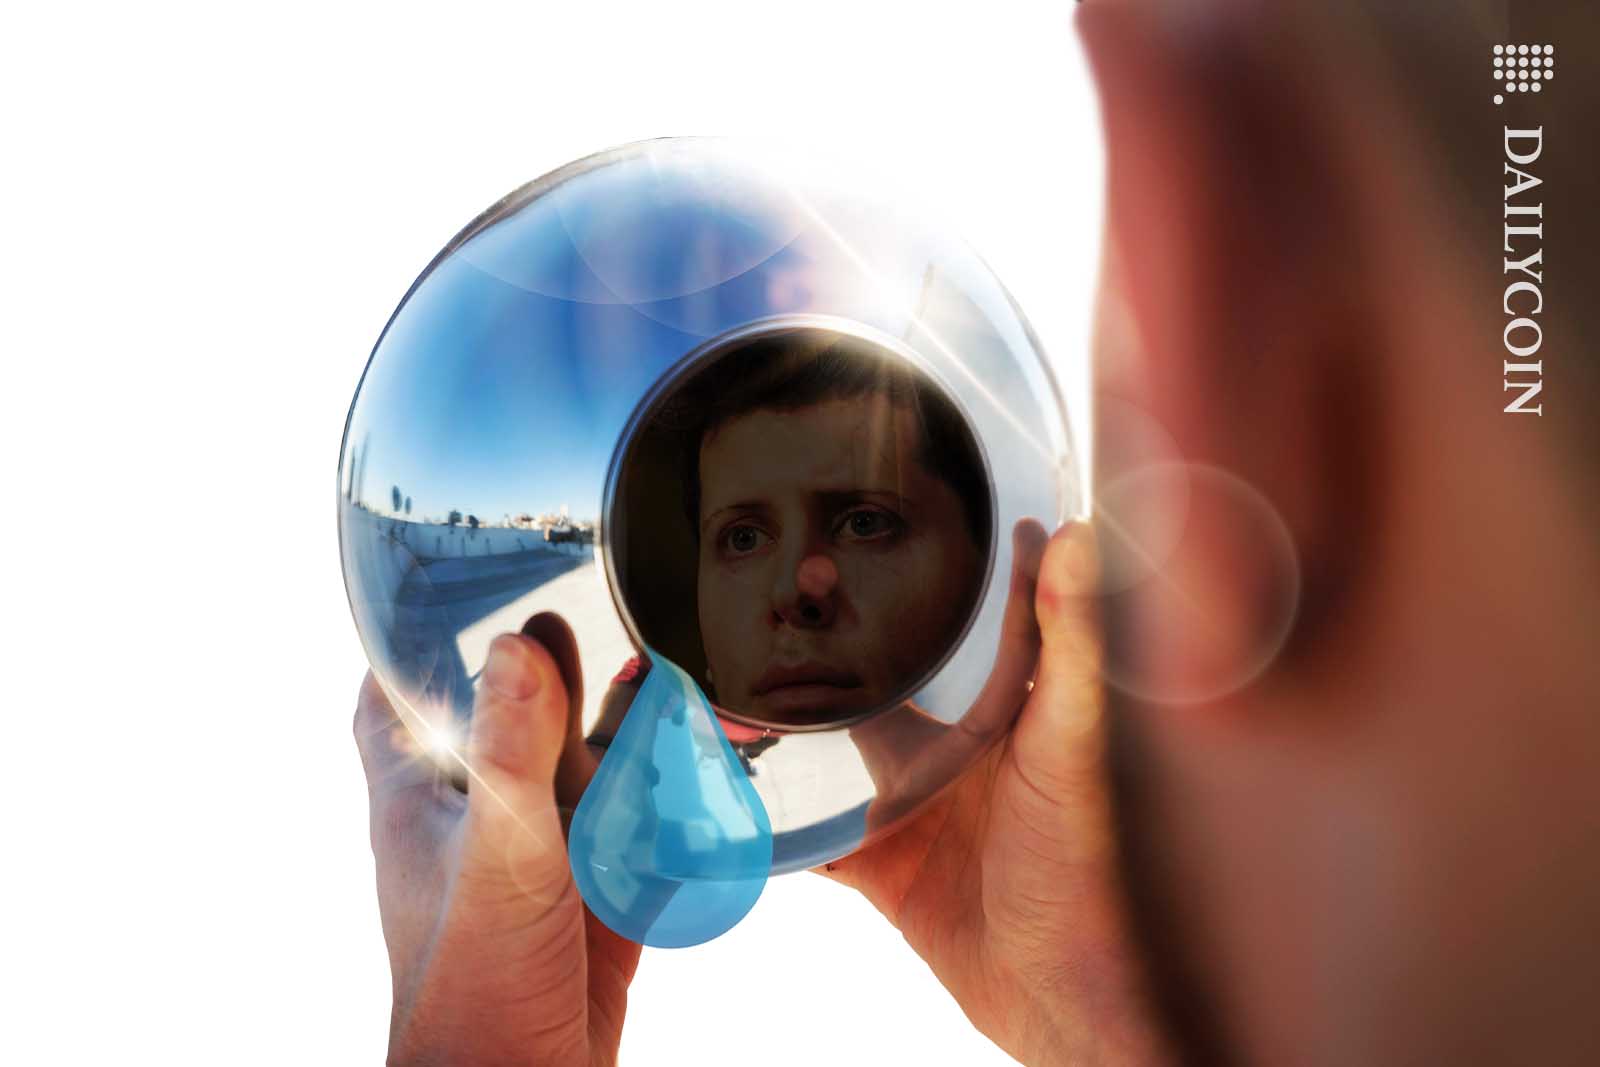 Sam Altman's face on the reflection of an World Coin eye scanner sphere. Large teardrop rolls off the scanner.